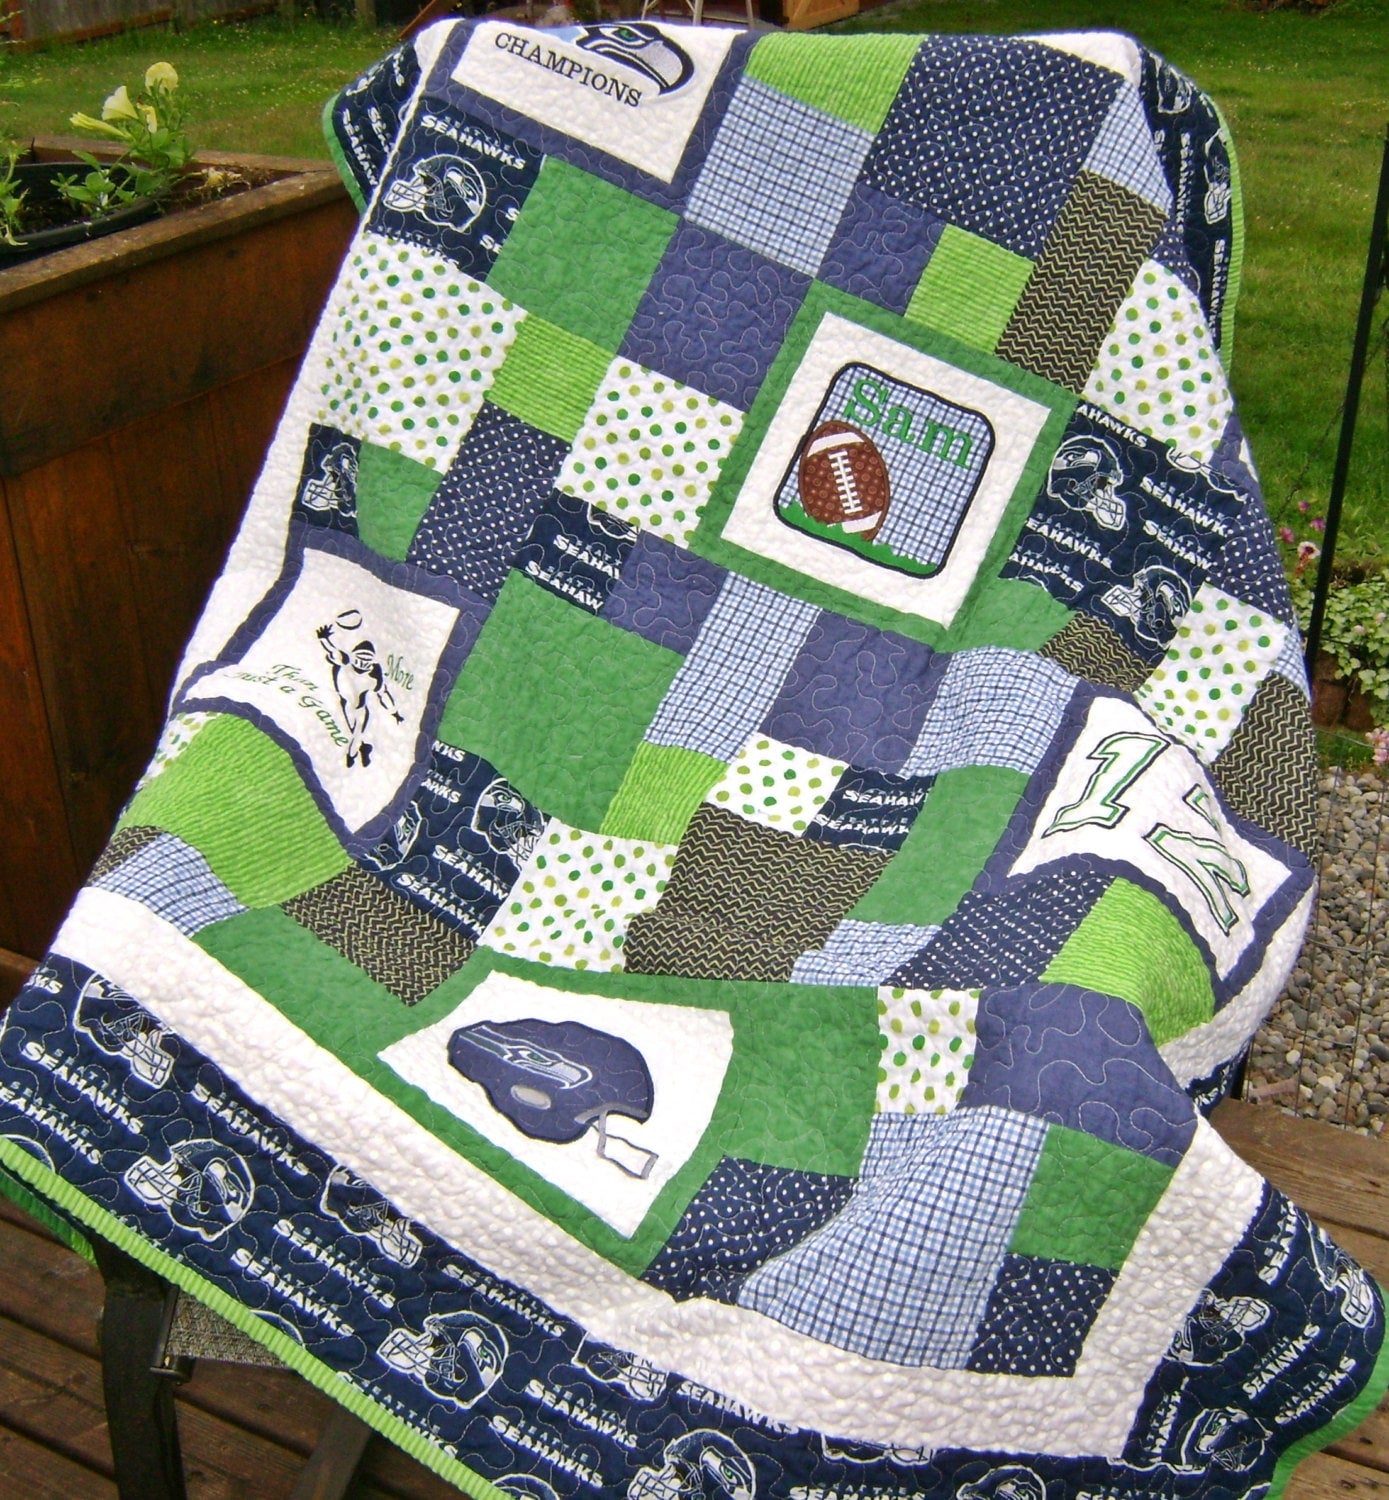 Have it Your Way Quilt Pattern ~ great pattern to make stunning team quilts, GO hawks!!